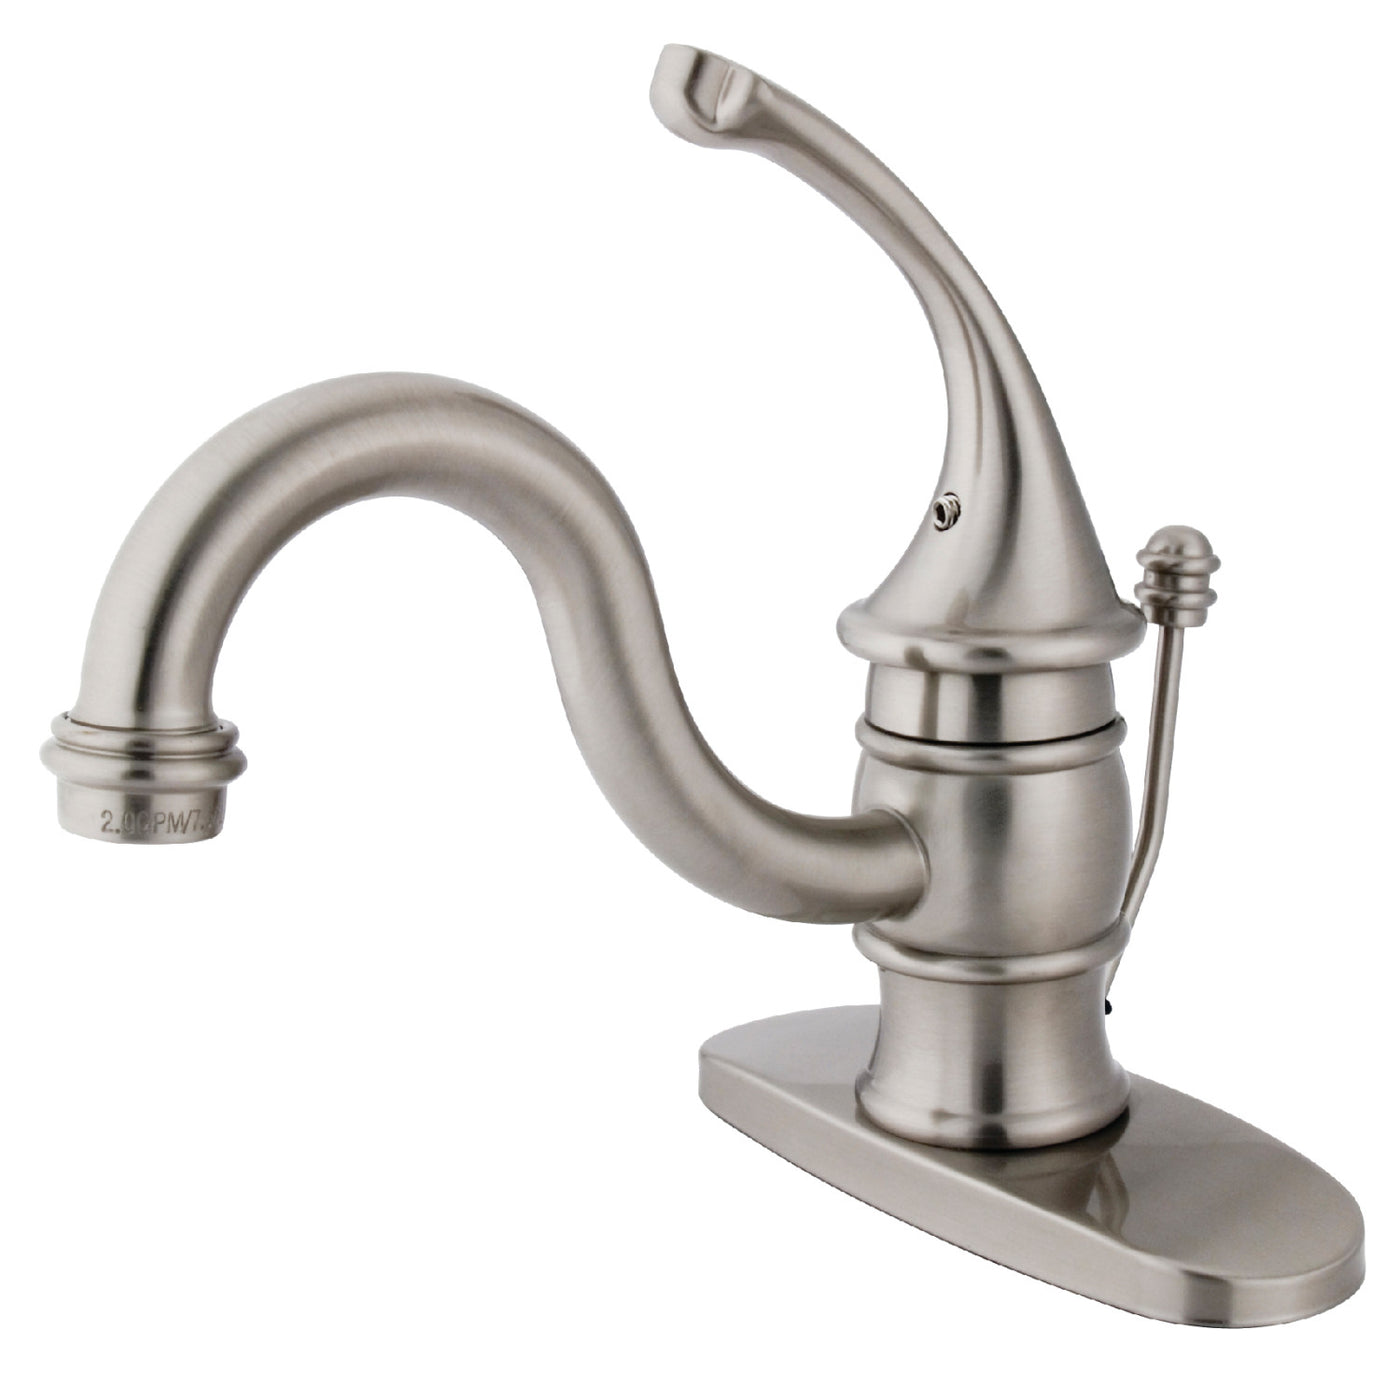 Elements of Design EB3408GL Single-Handle Bathroom Faucet with Pop-Up Drain, Brushed Nickel